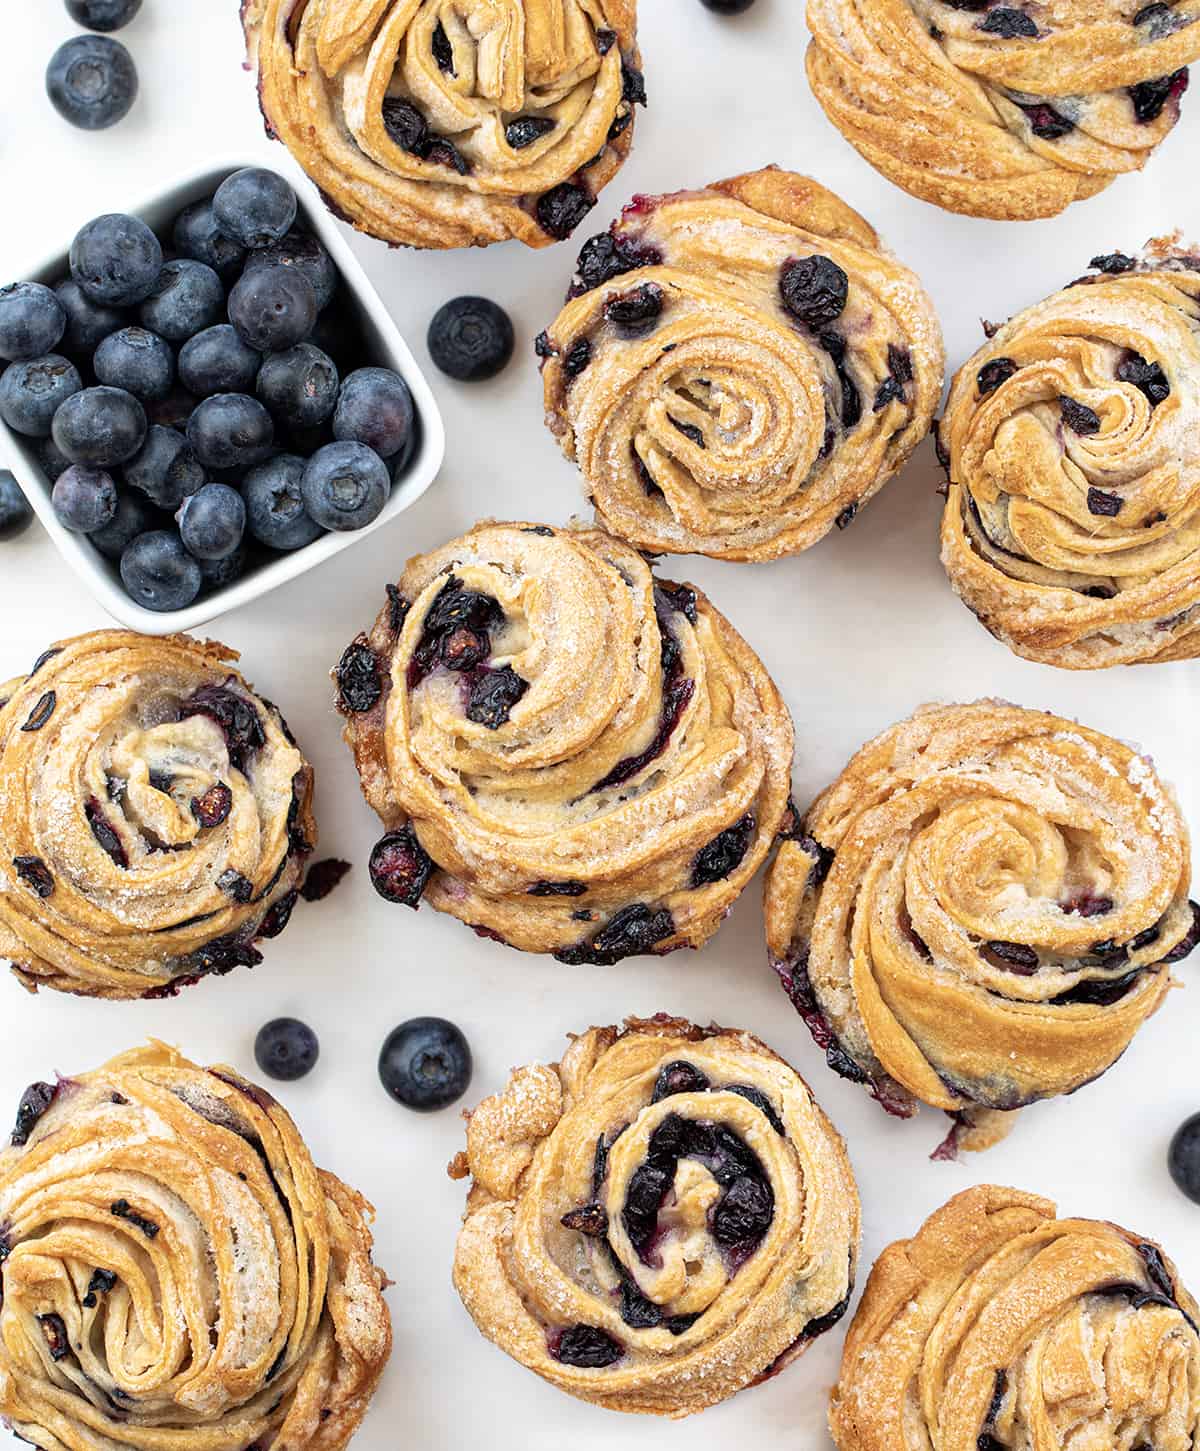 Blueberry Cruffins From Overhead on a White Counter with Fresh Blueberries.